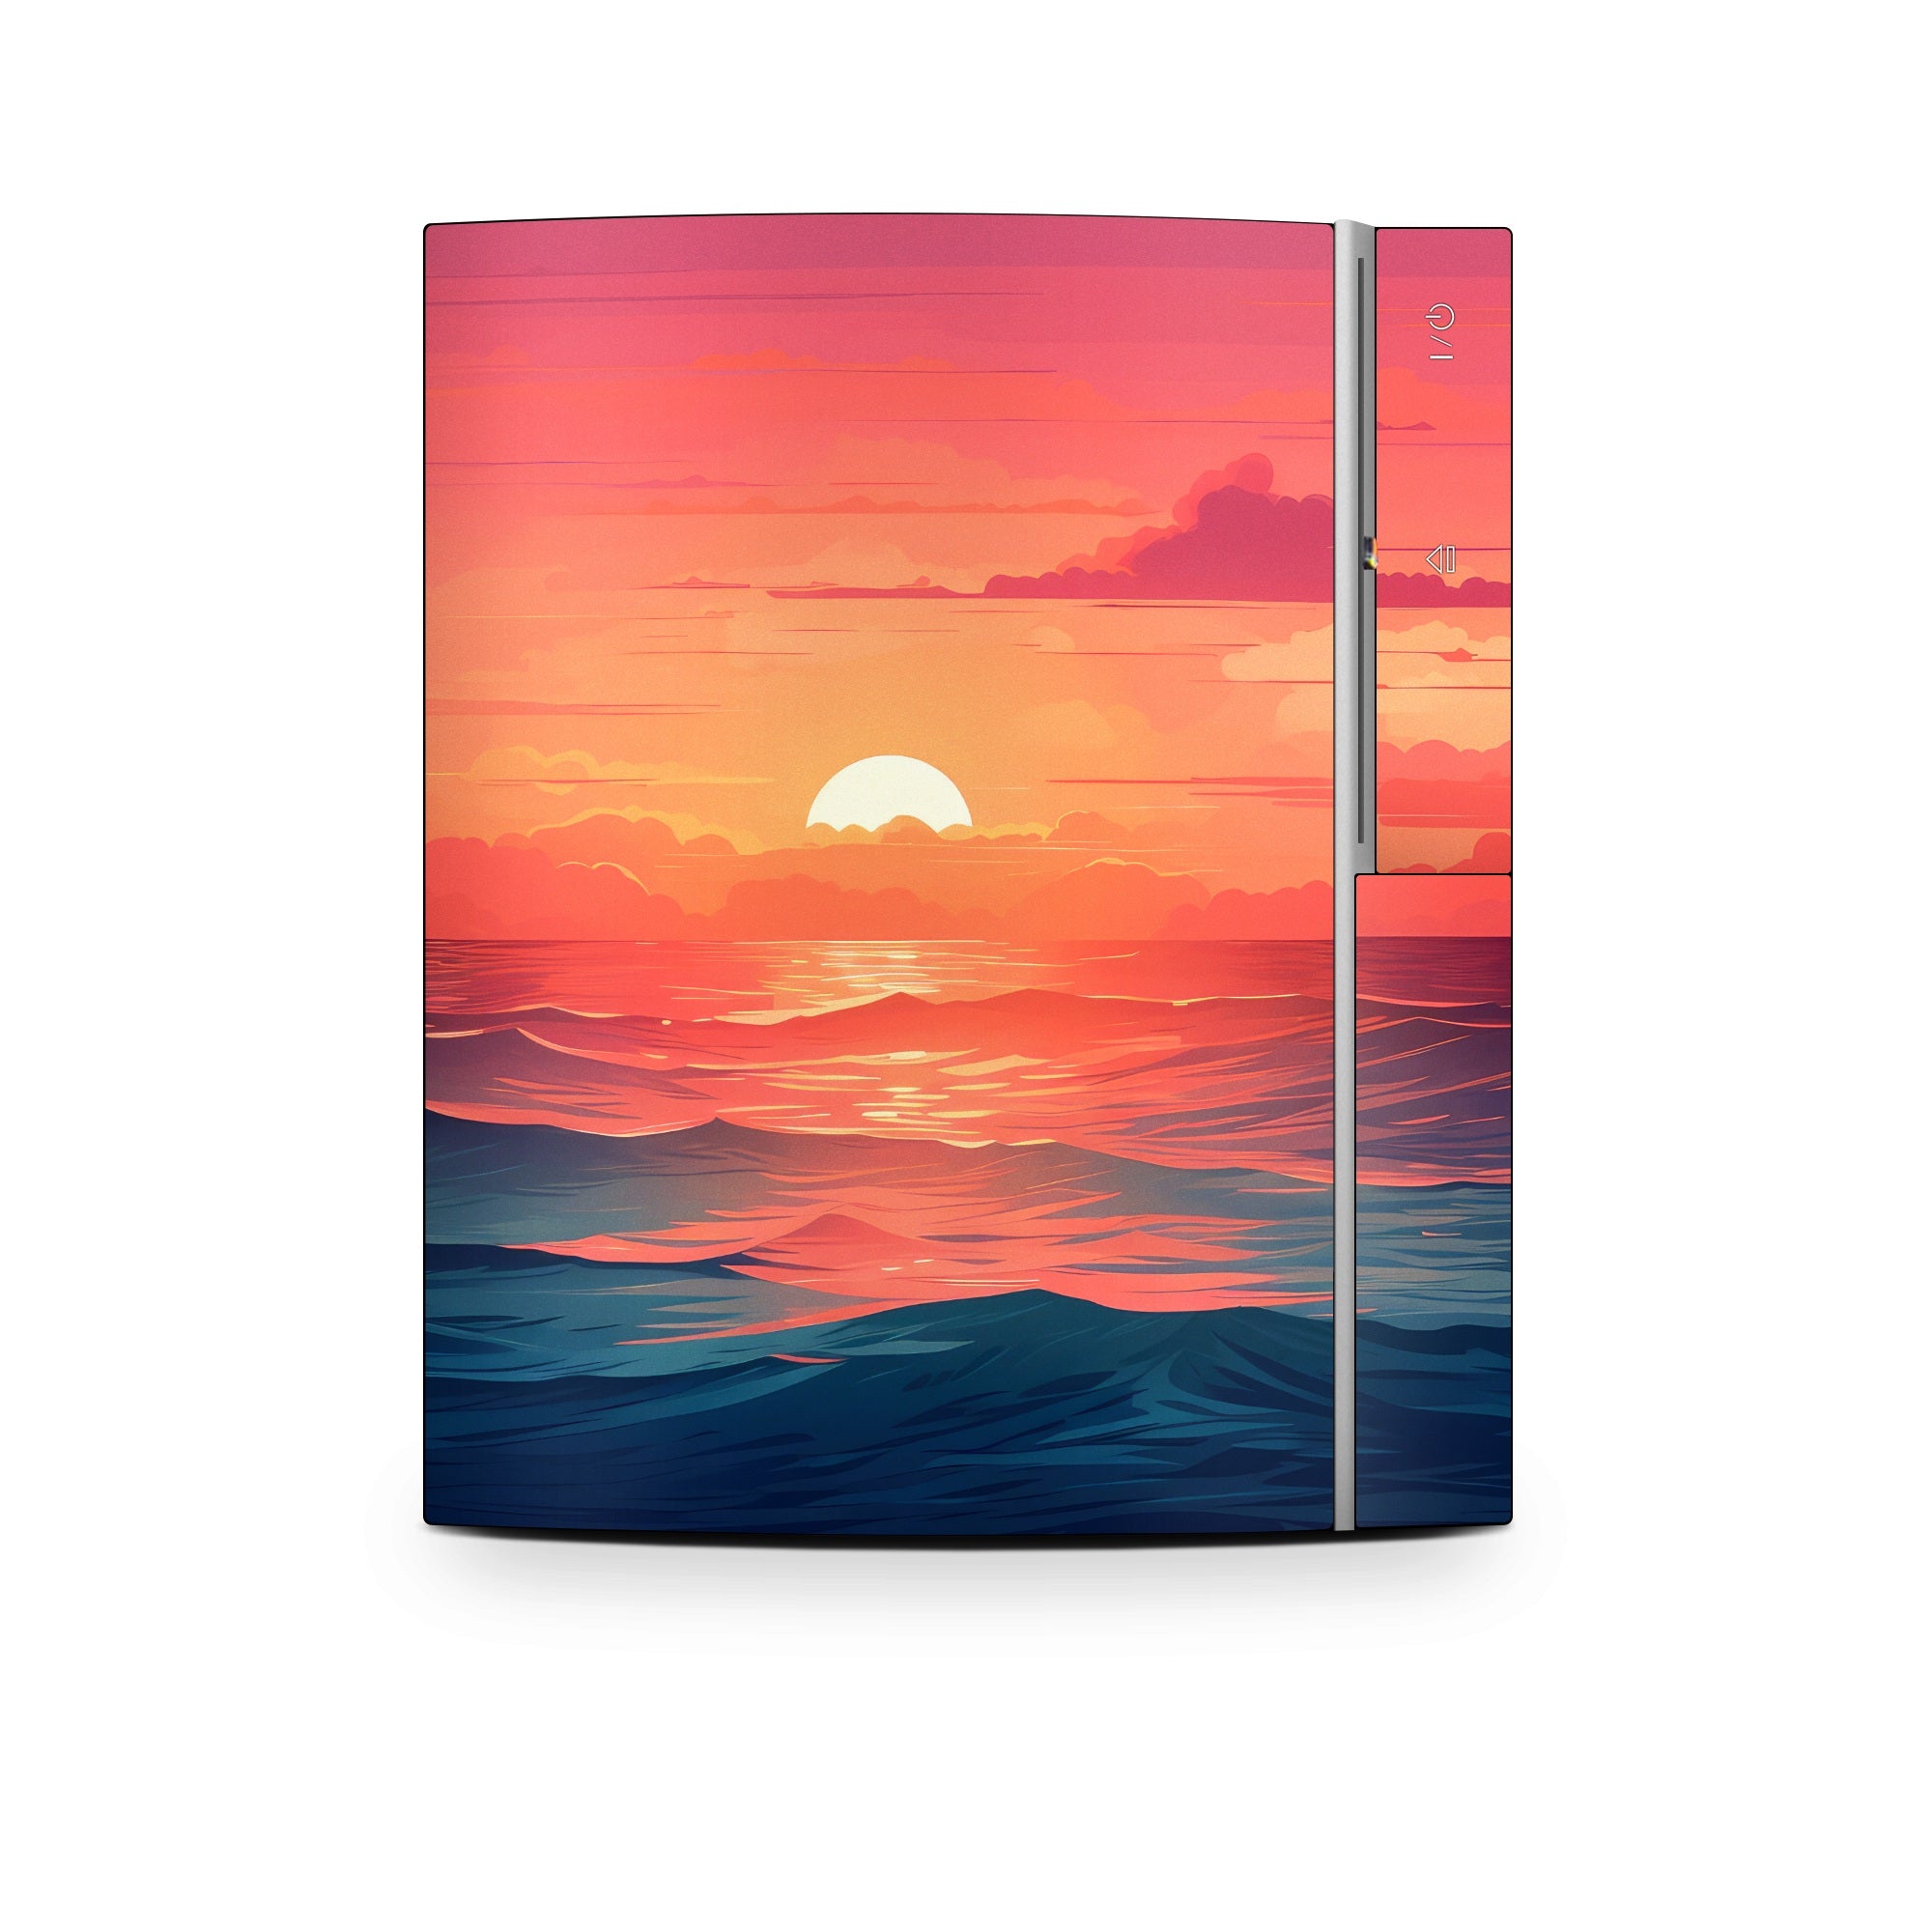 Floating Home - Sony PS3 Skin